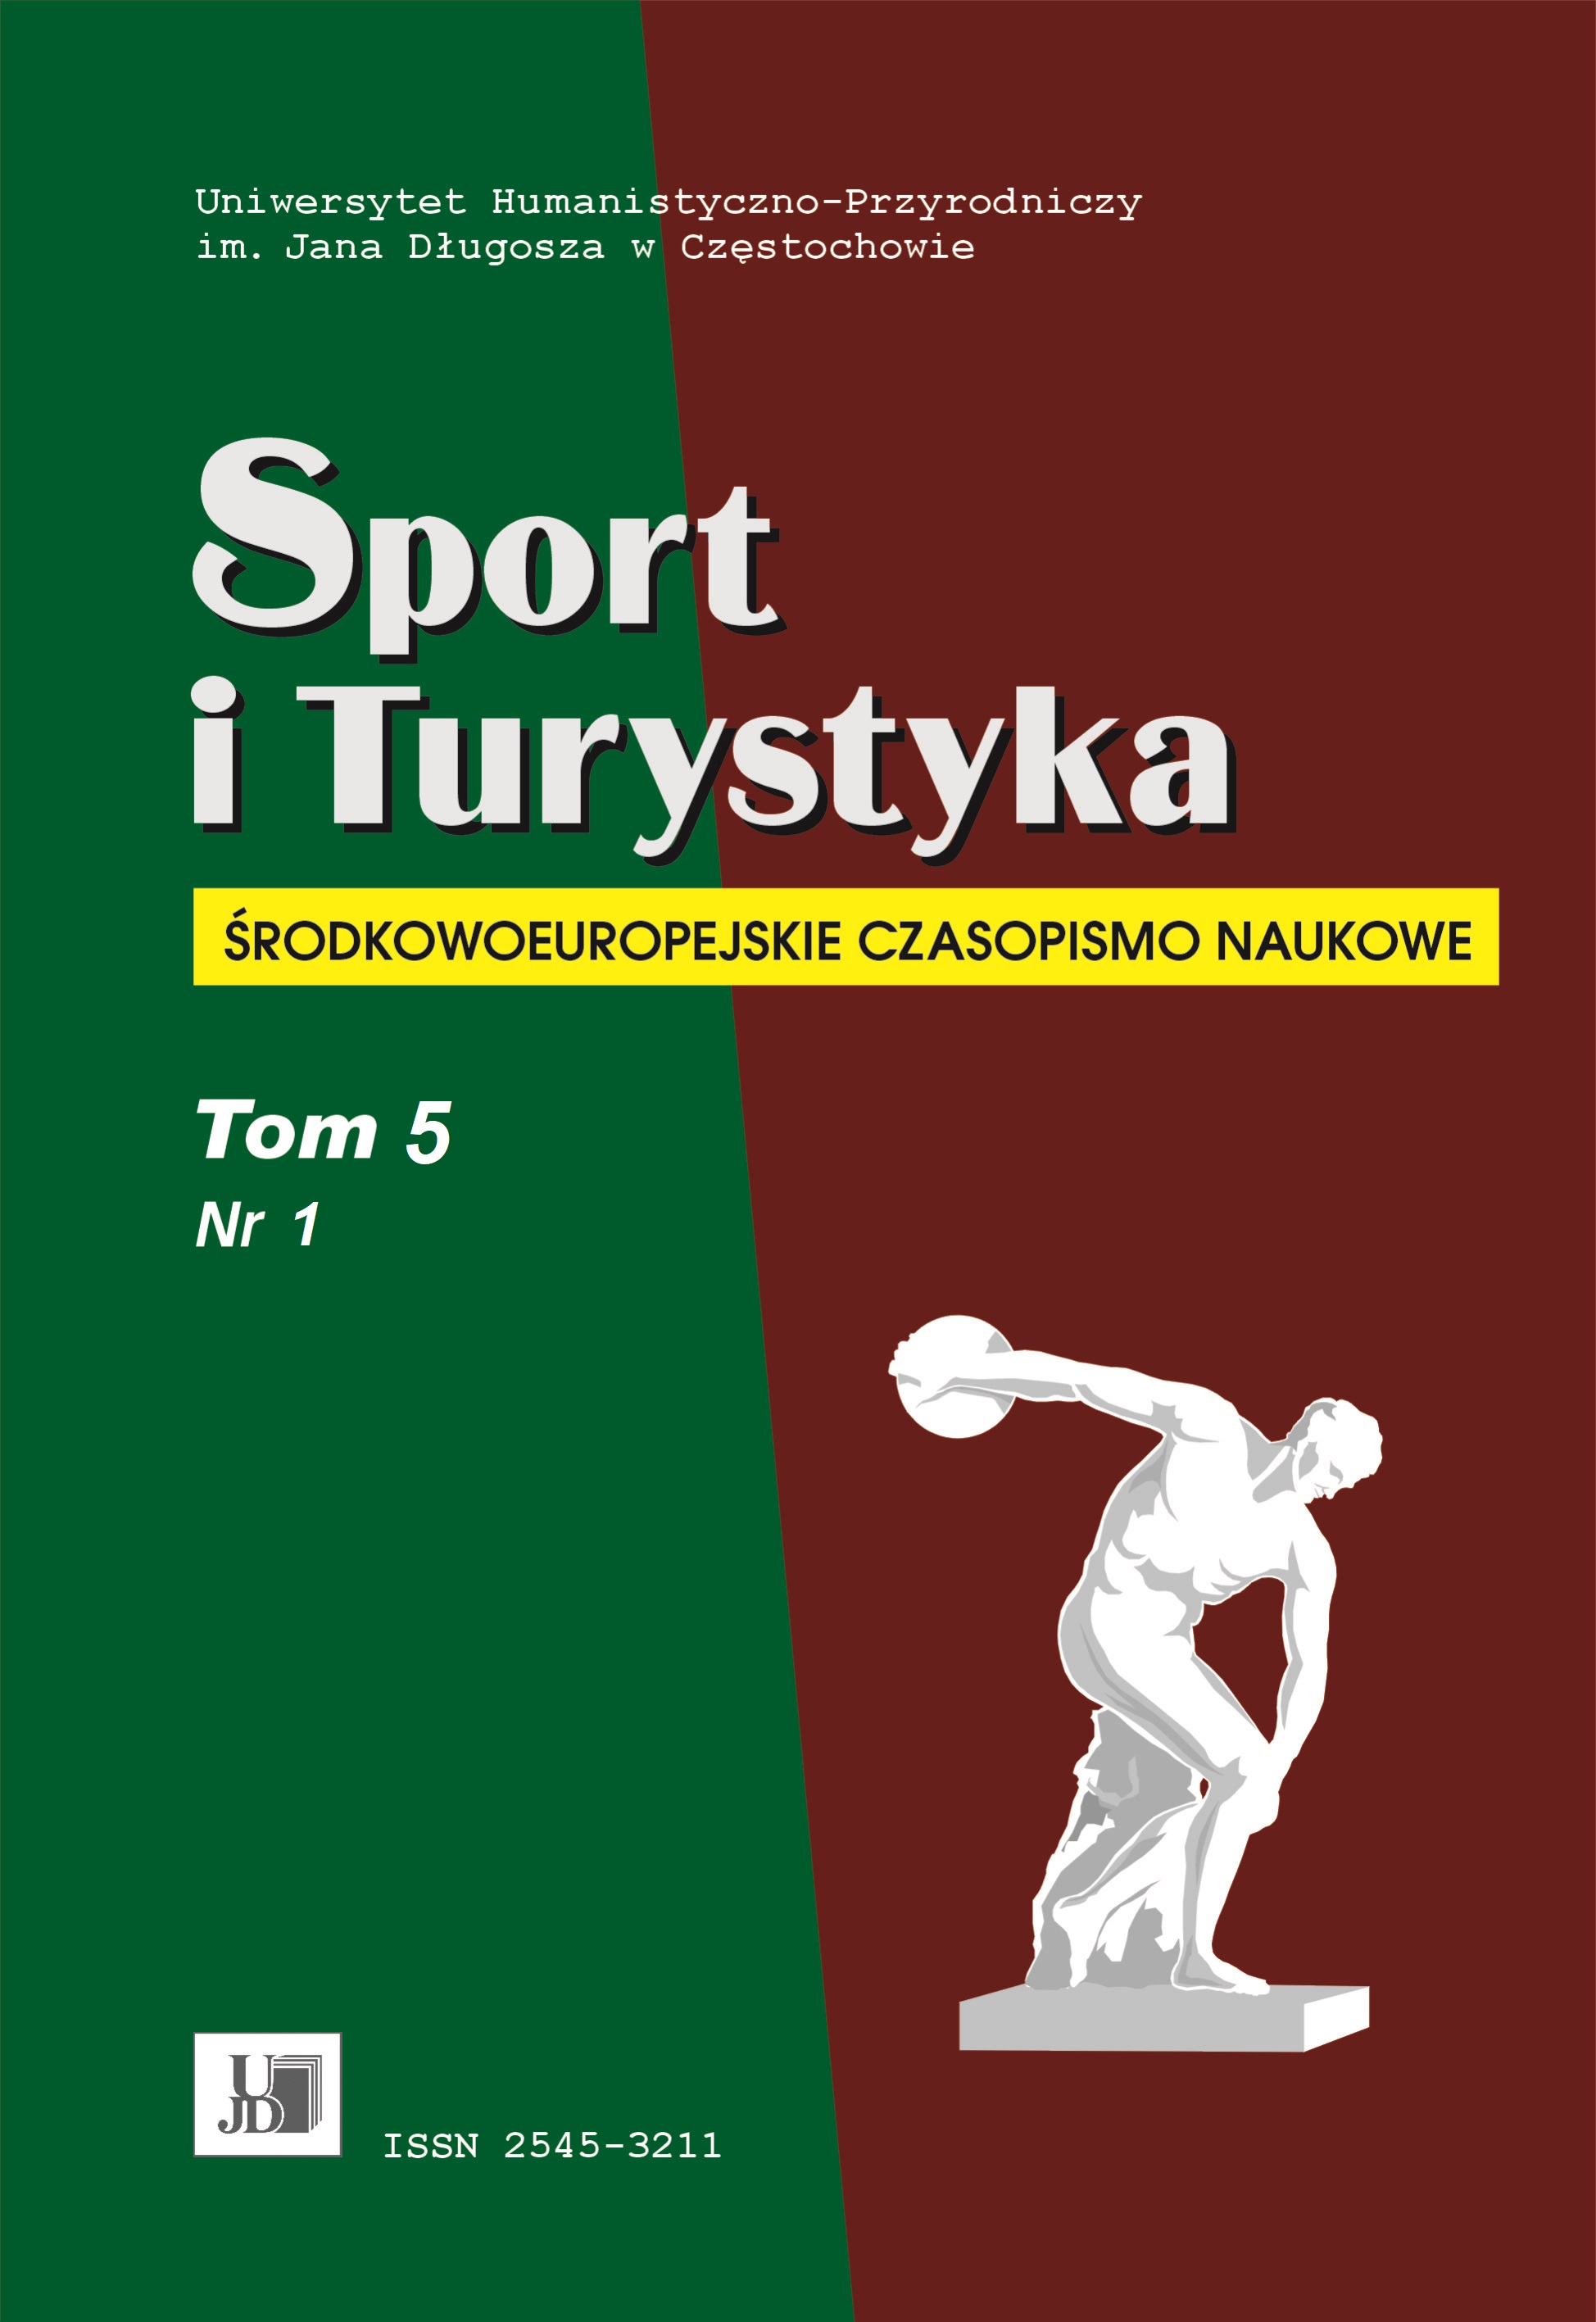 Wrestling in the Association of Folk Sport Teams (LZS) in Warmia and Mazury (1964–1975) Cover Image